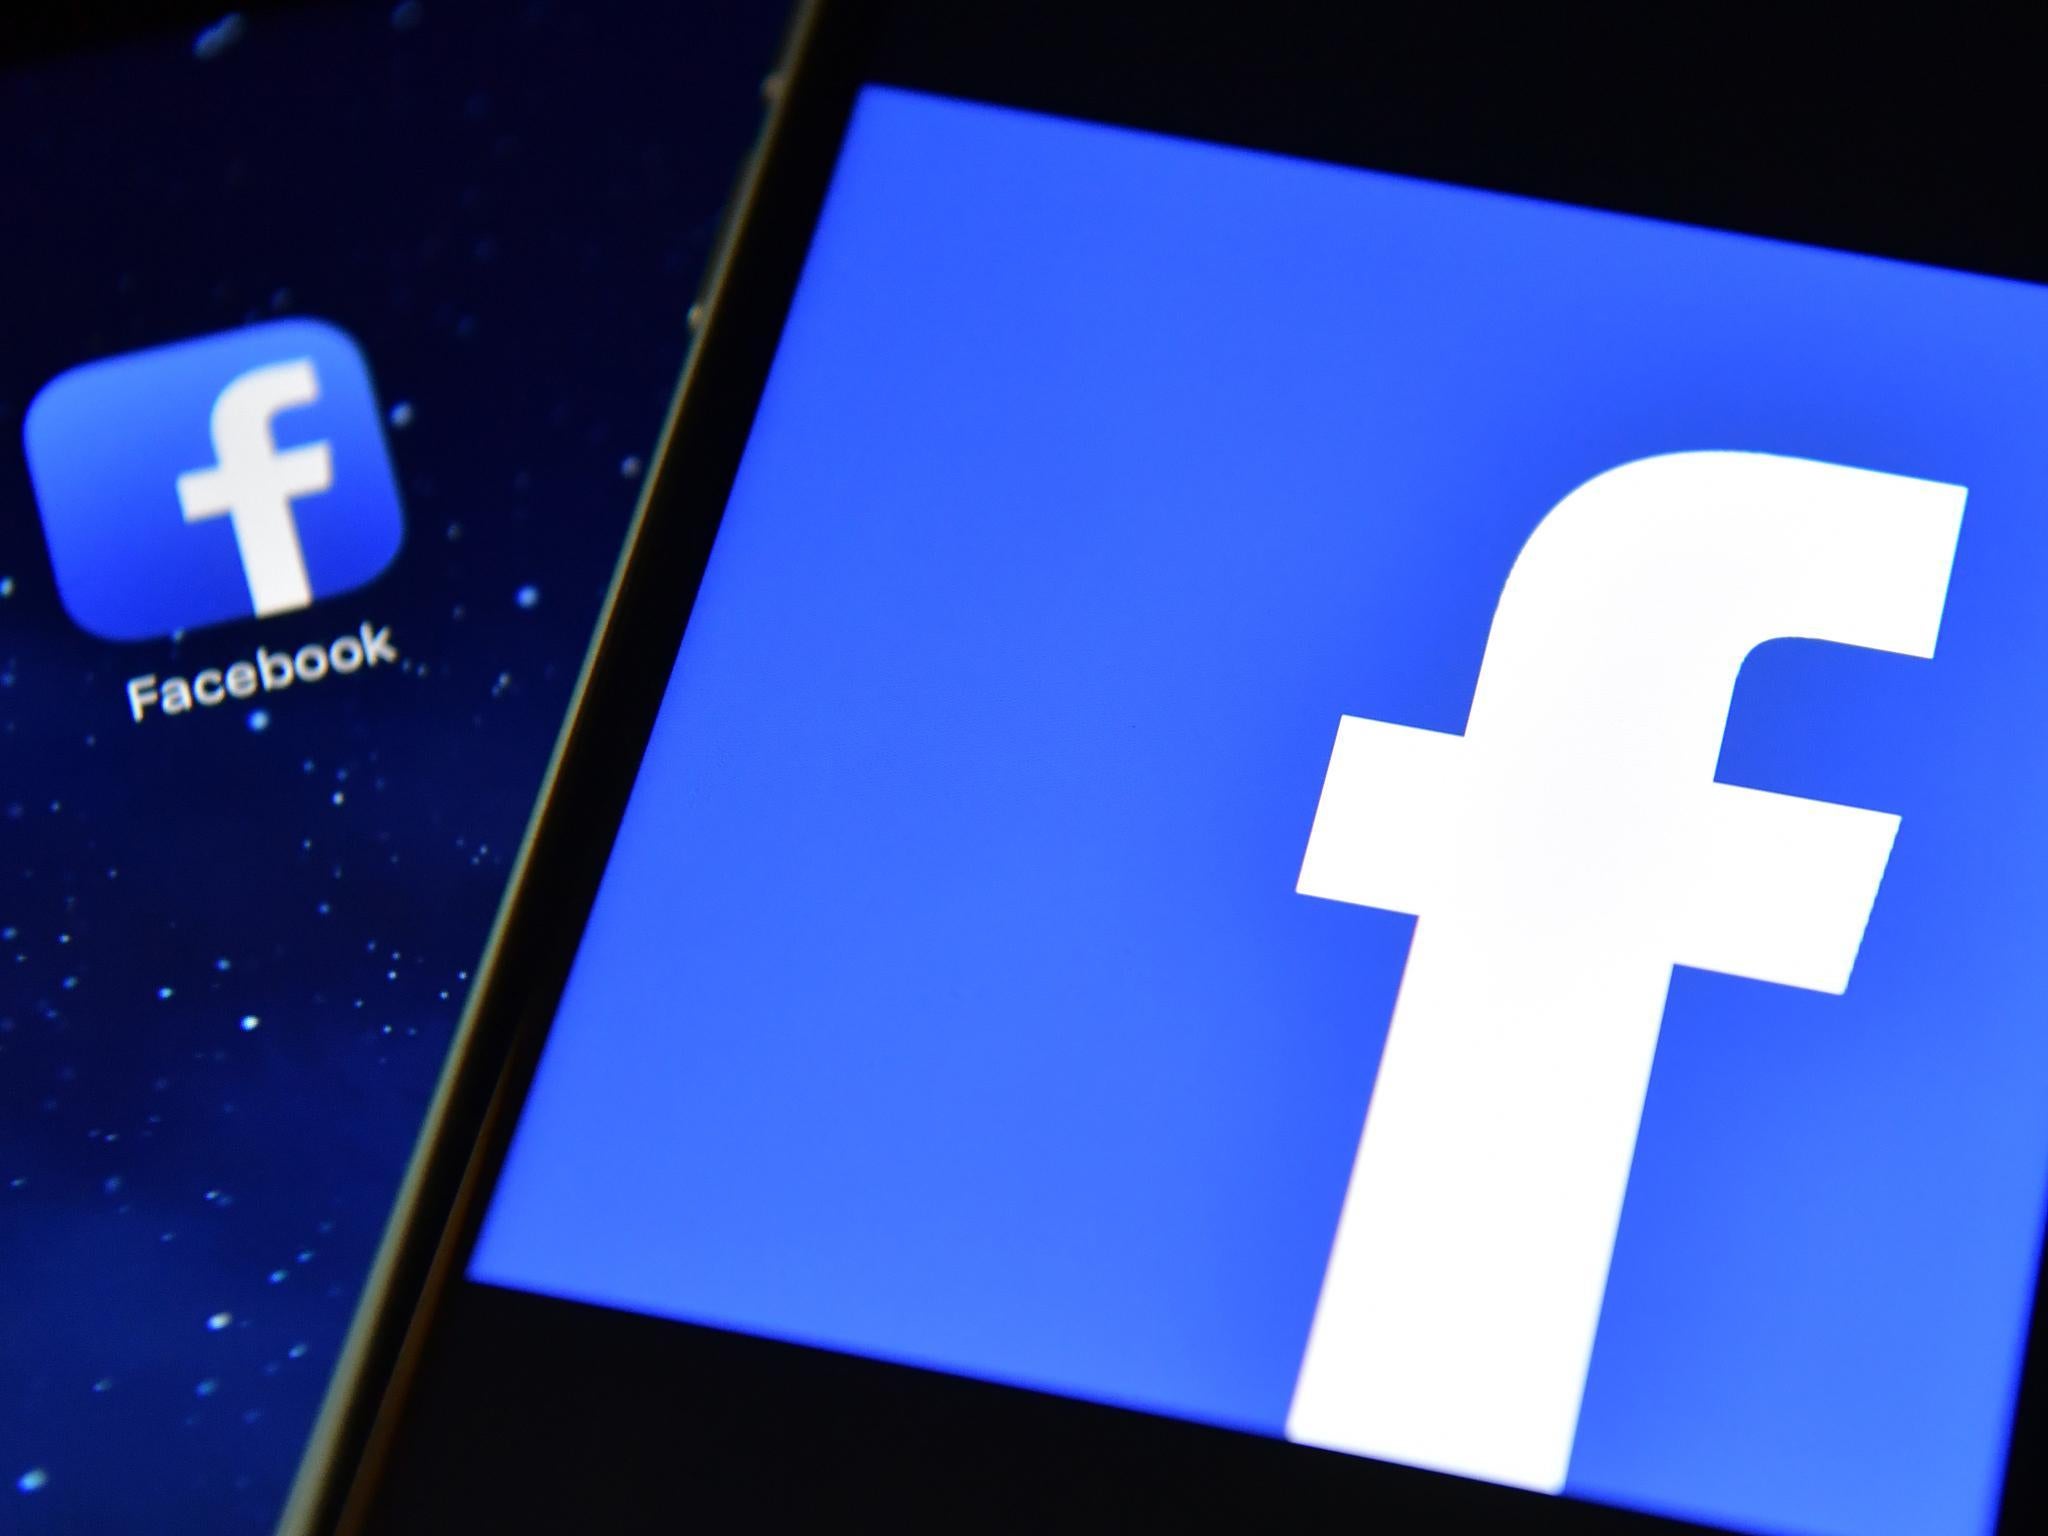 Facebook had previously resisted calls for the "dislike" feature